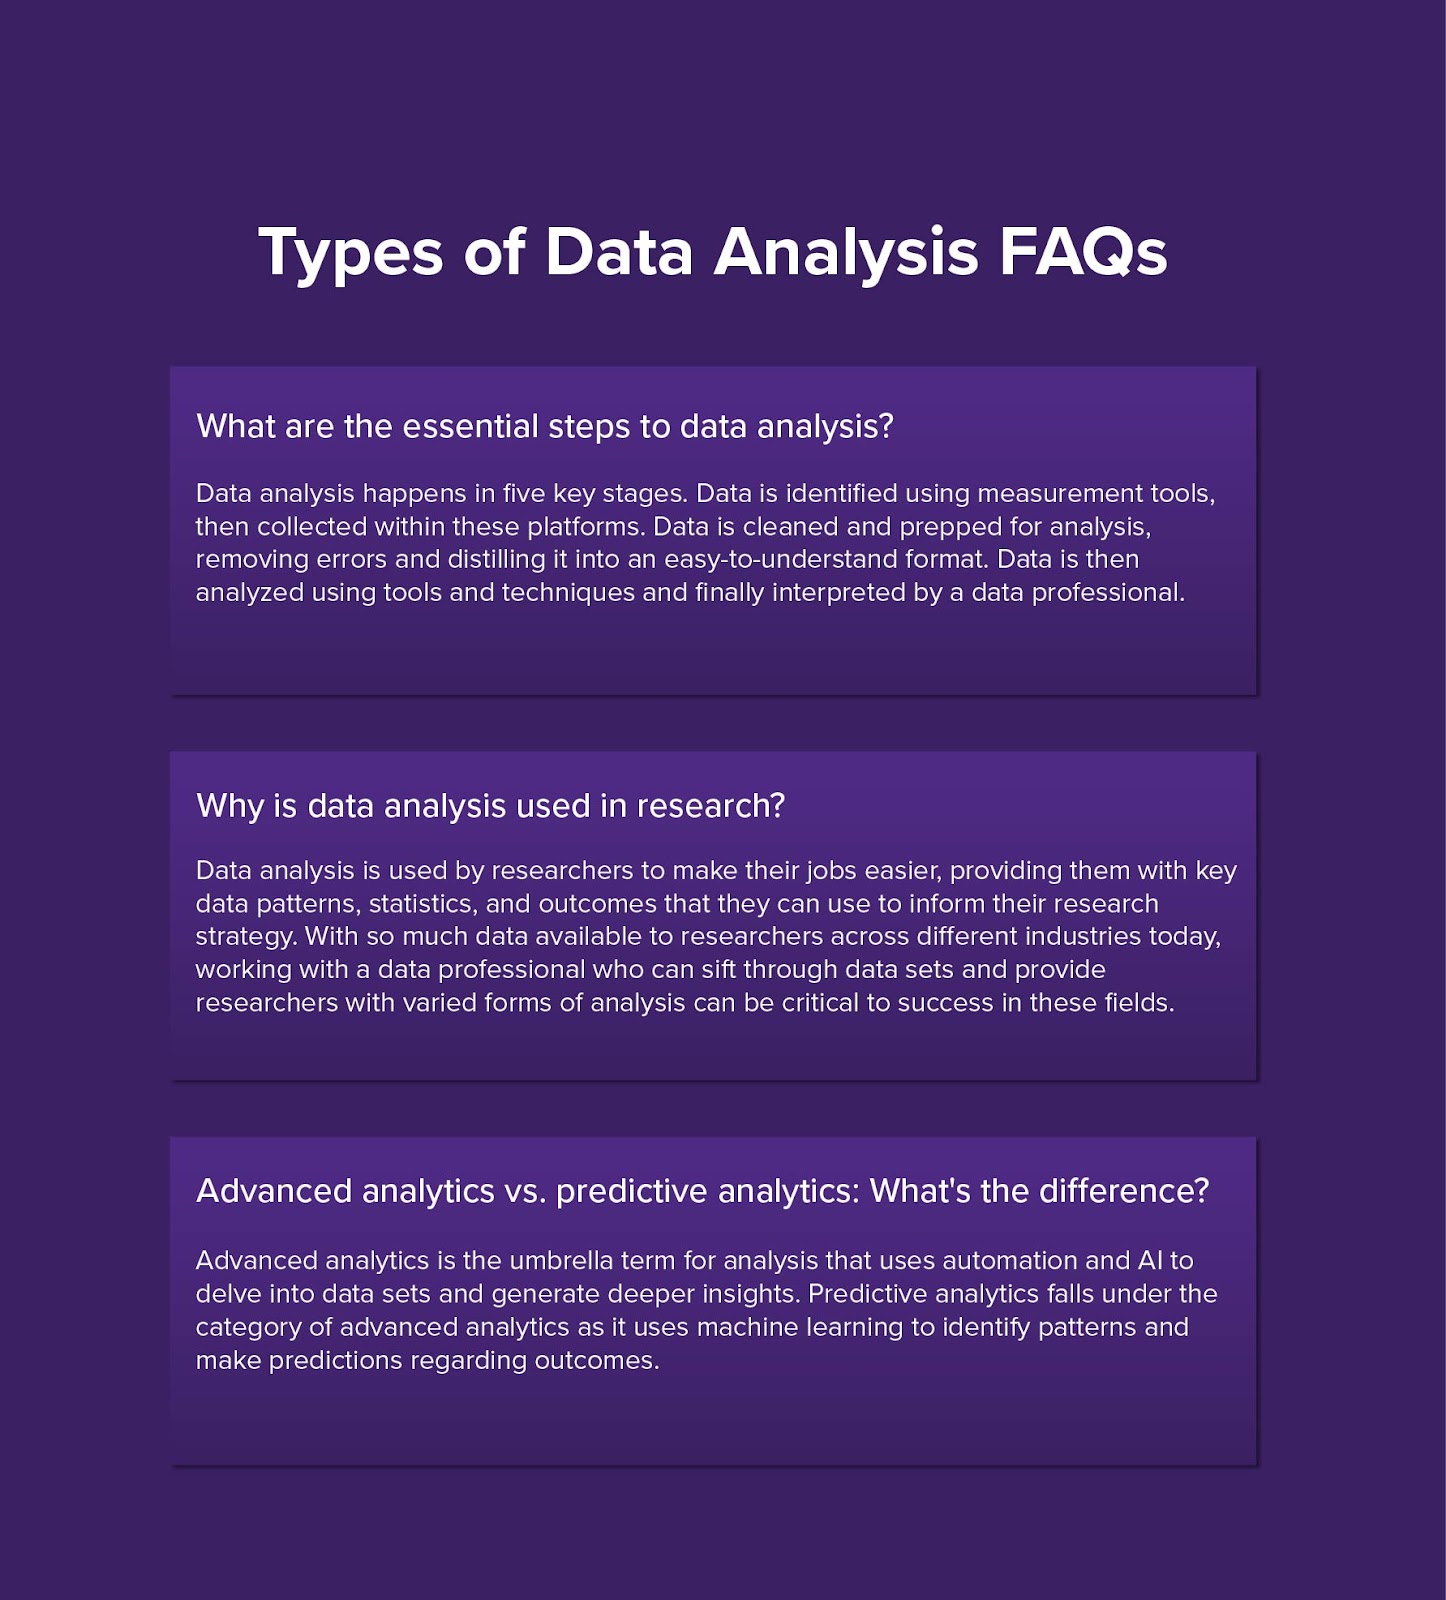 An image that features data analysis FAQs with the answers that are shared in the article.